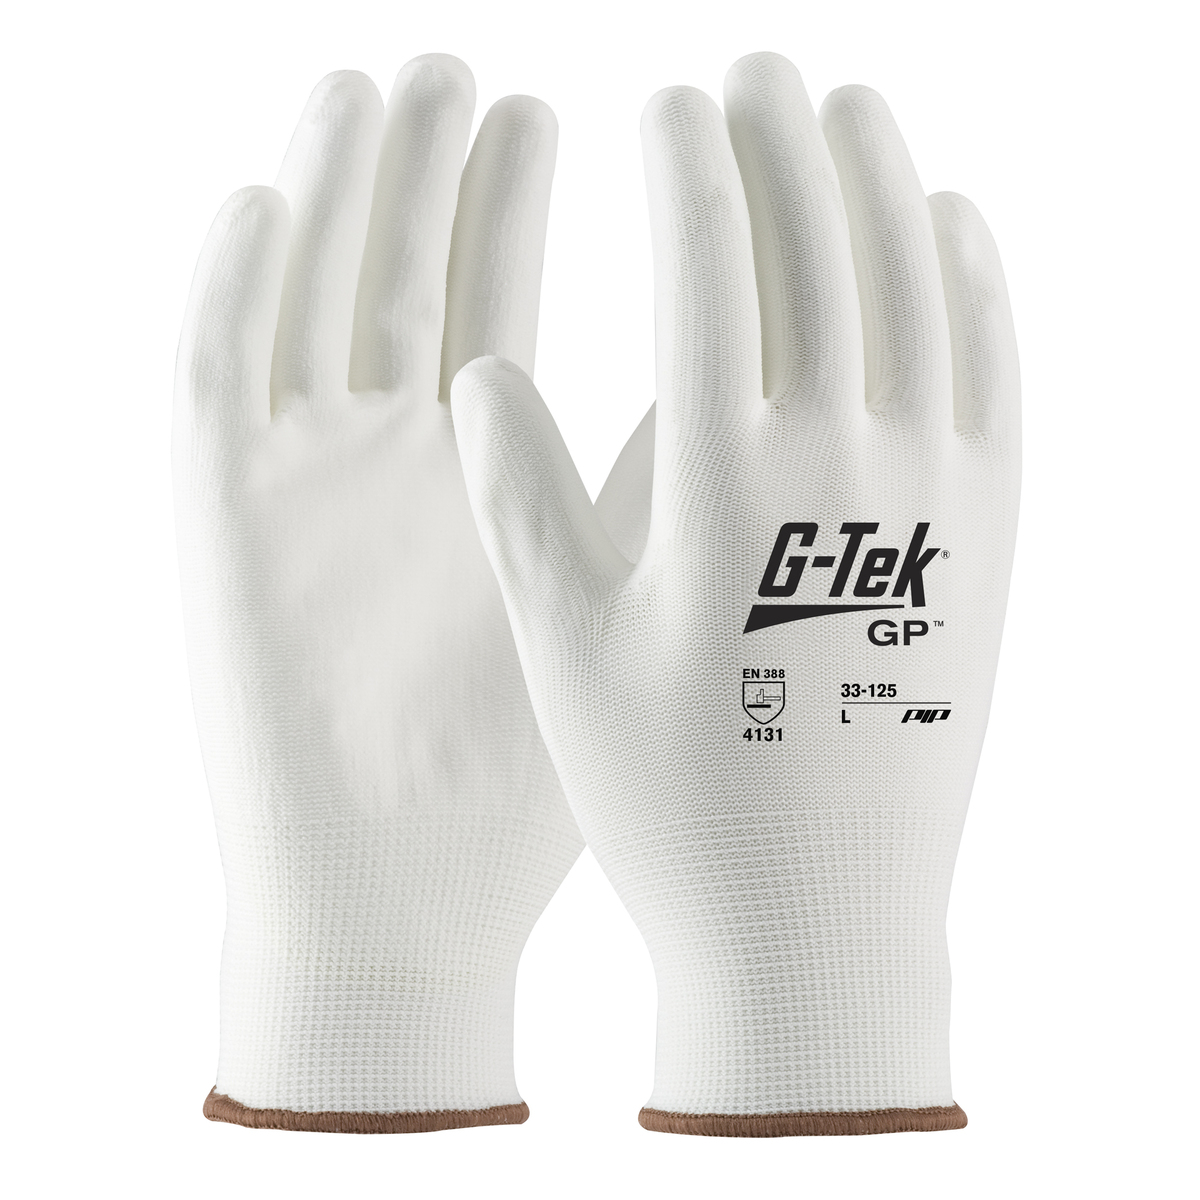 PIP® Medium G-Tek® GP™ 13 Gauge White Polyurethane Palm And Finger Coated Work Gloves With Nylon Liner And Continuous Knit Wrist